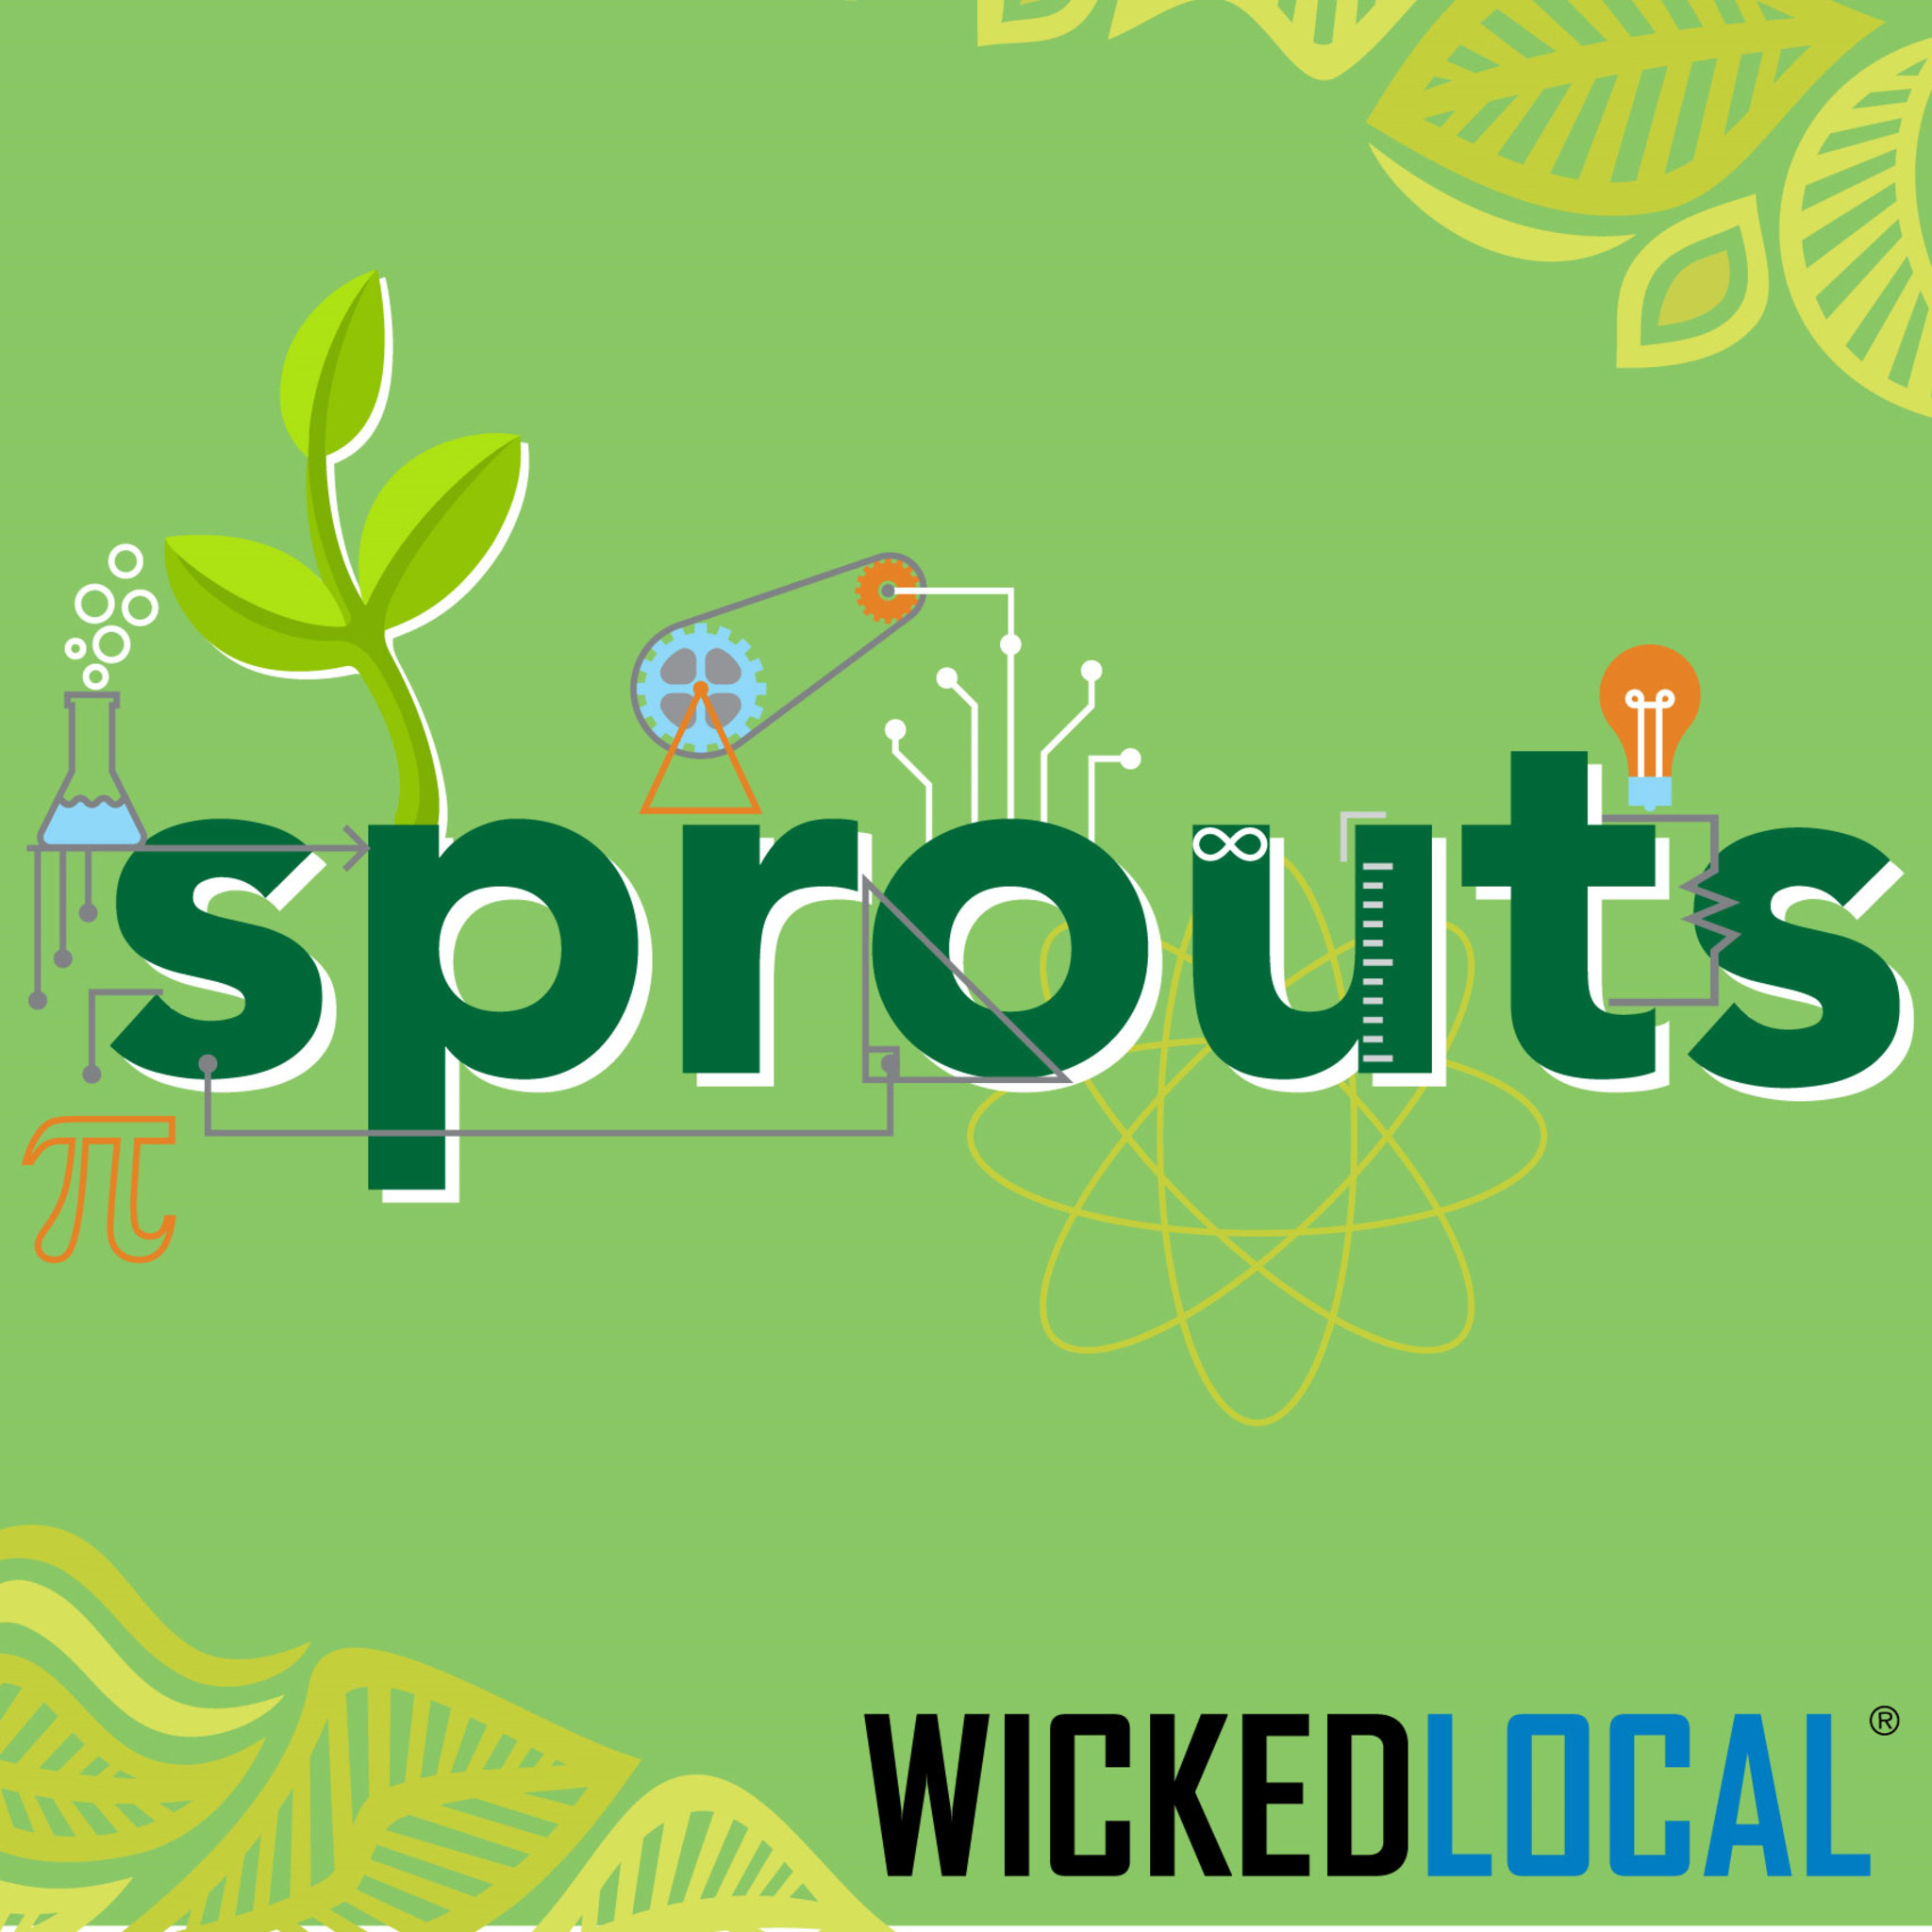 An introduction to Laura Lovett & Sprouts